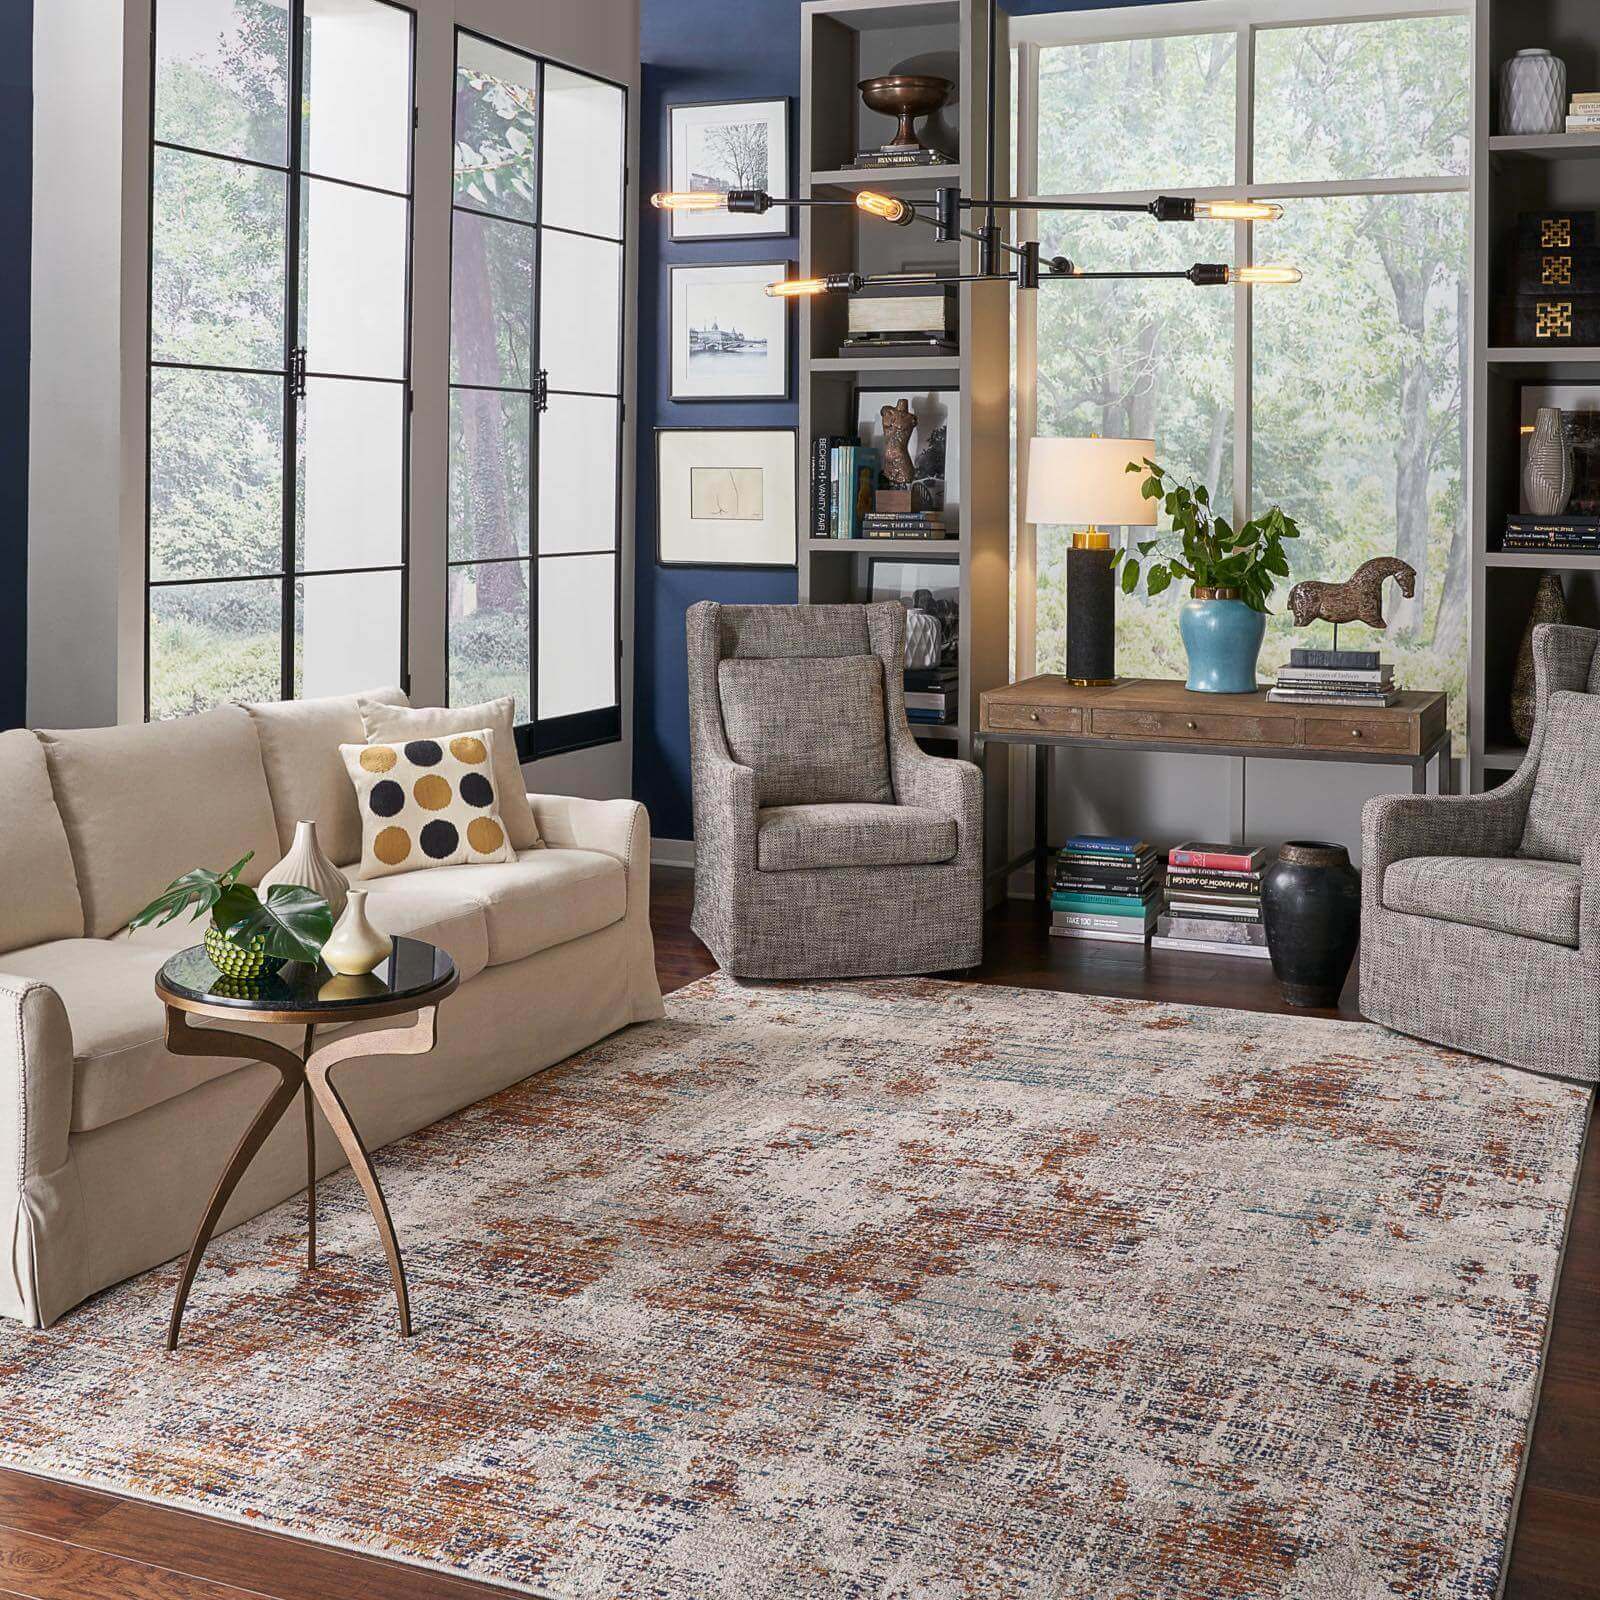 Living room Area rug | Cleveland Carpets and Floors